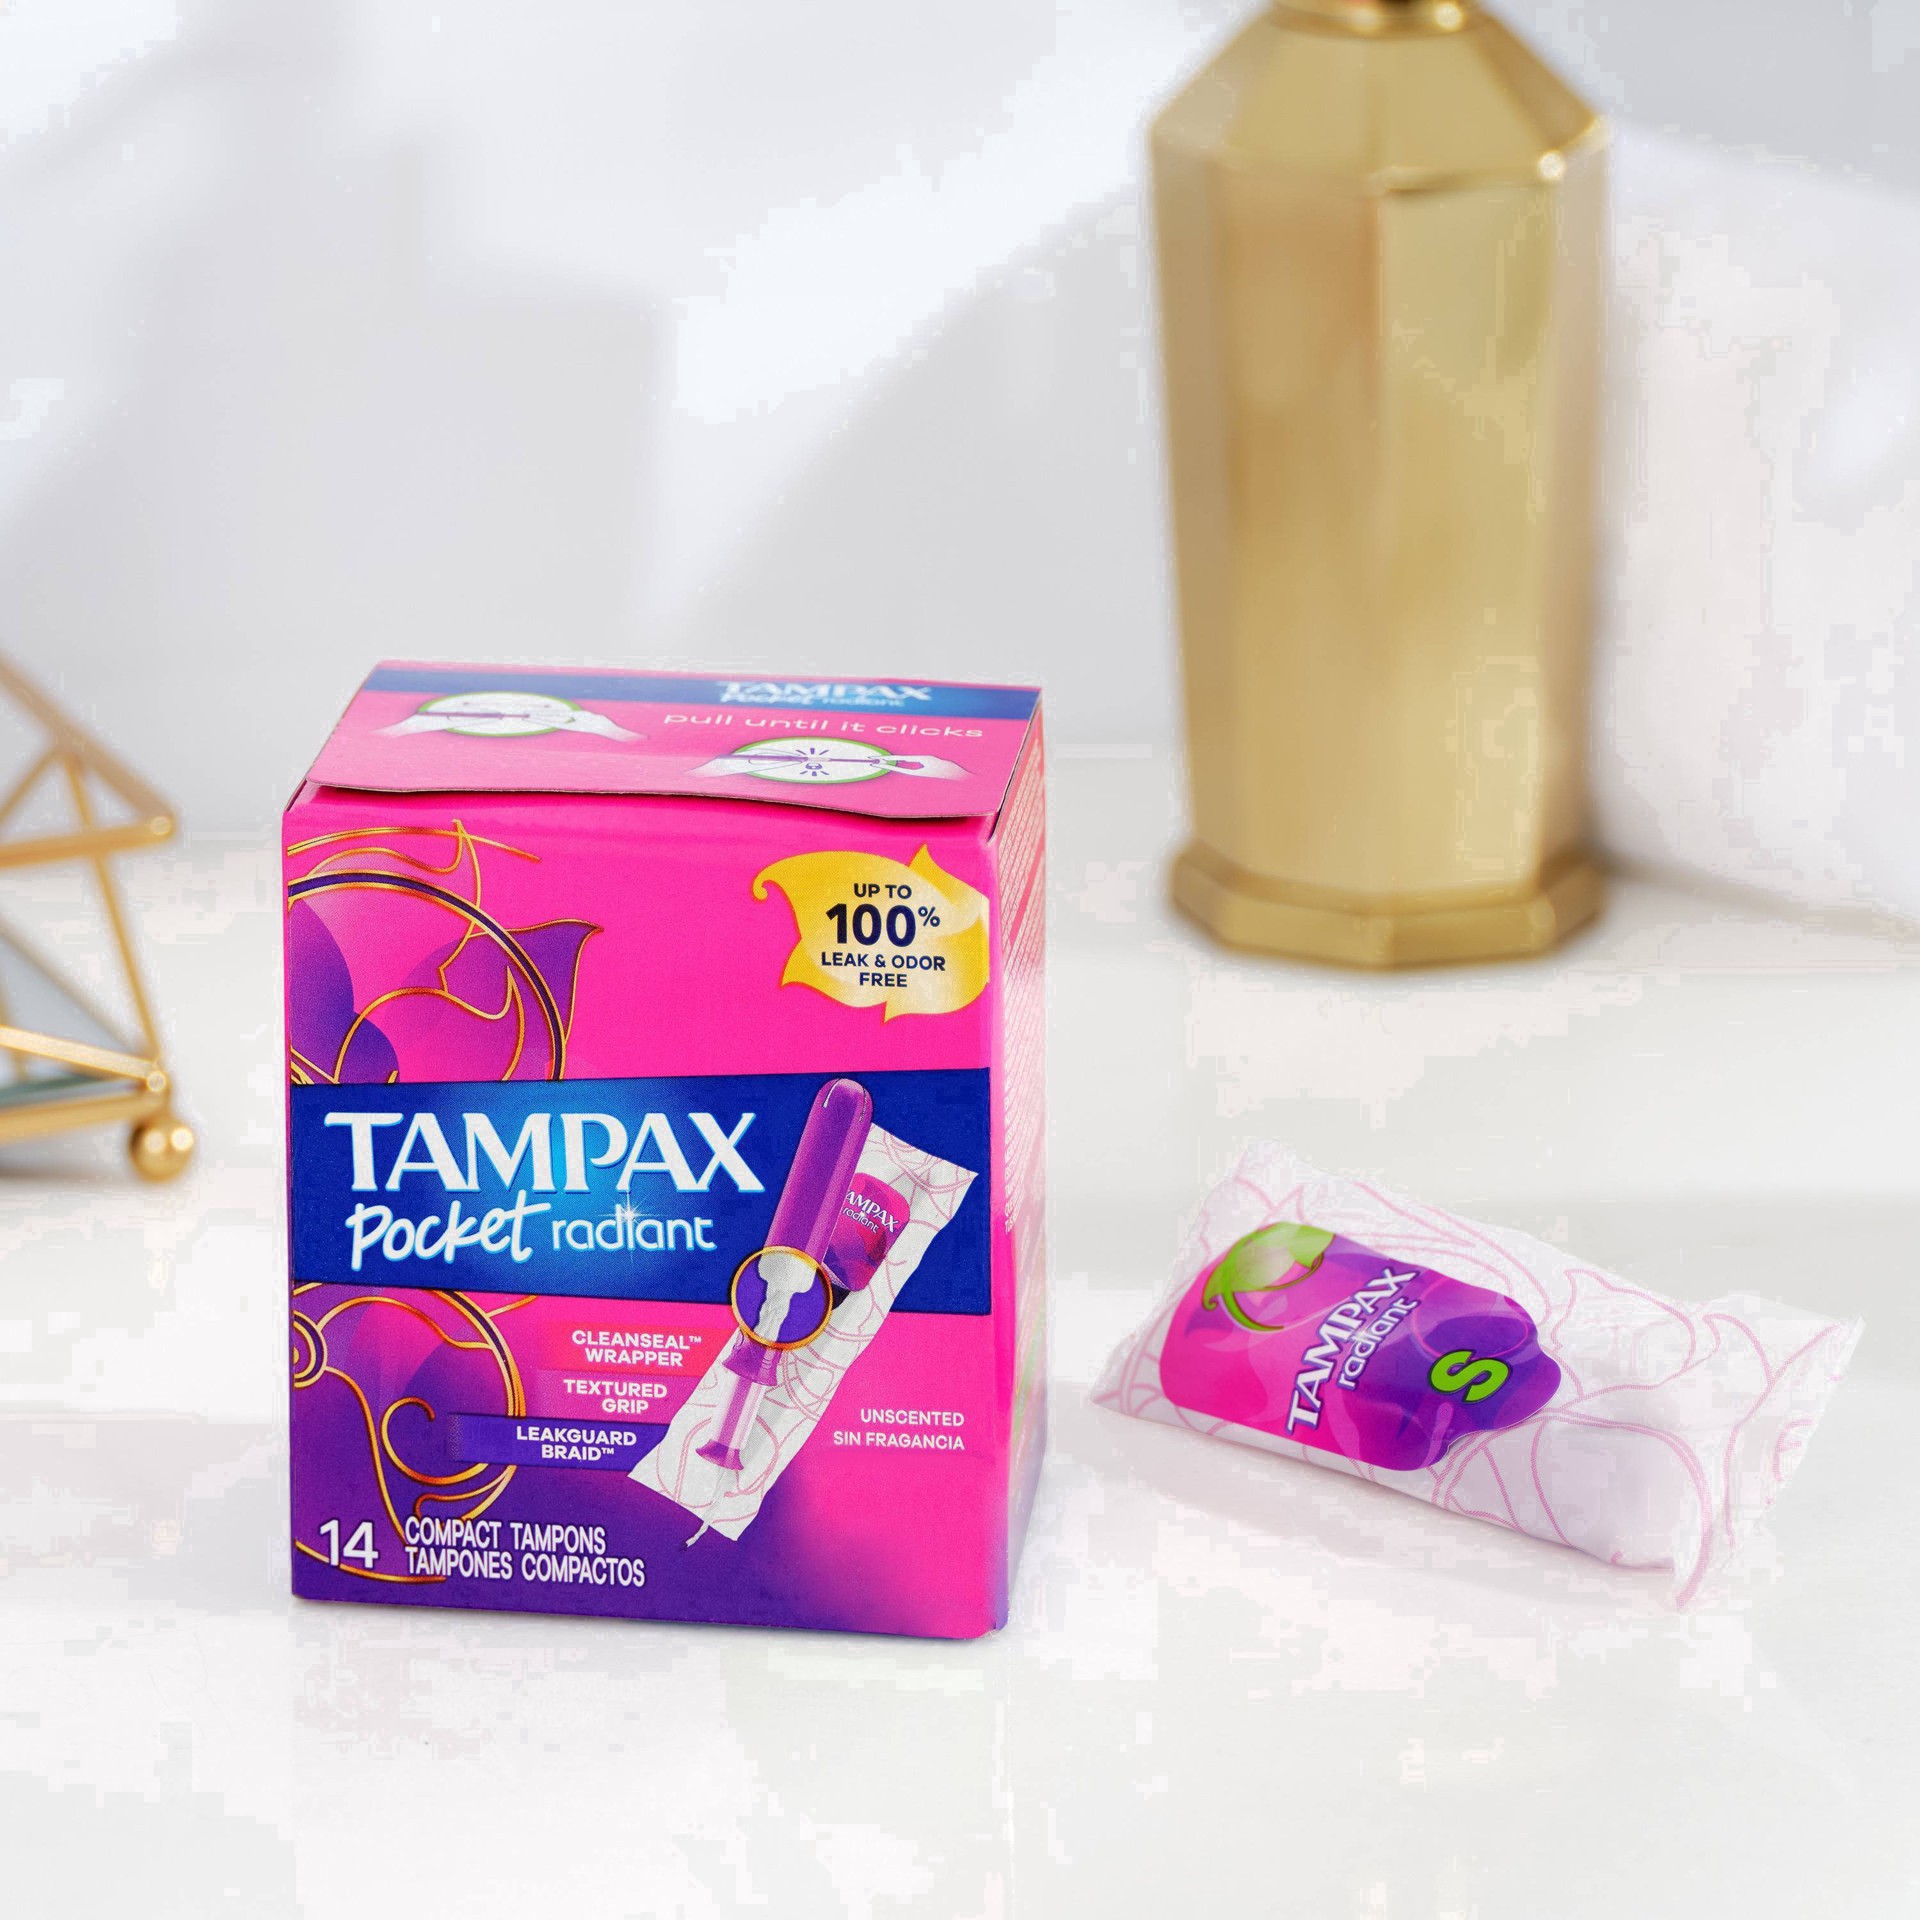 slide 52 of 94, Tampax Pocket Radiant Compact Plastic Tampons, With LeakGuard Braid, Super Absorbency, Unscented, 28 Count, 28 ct